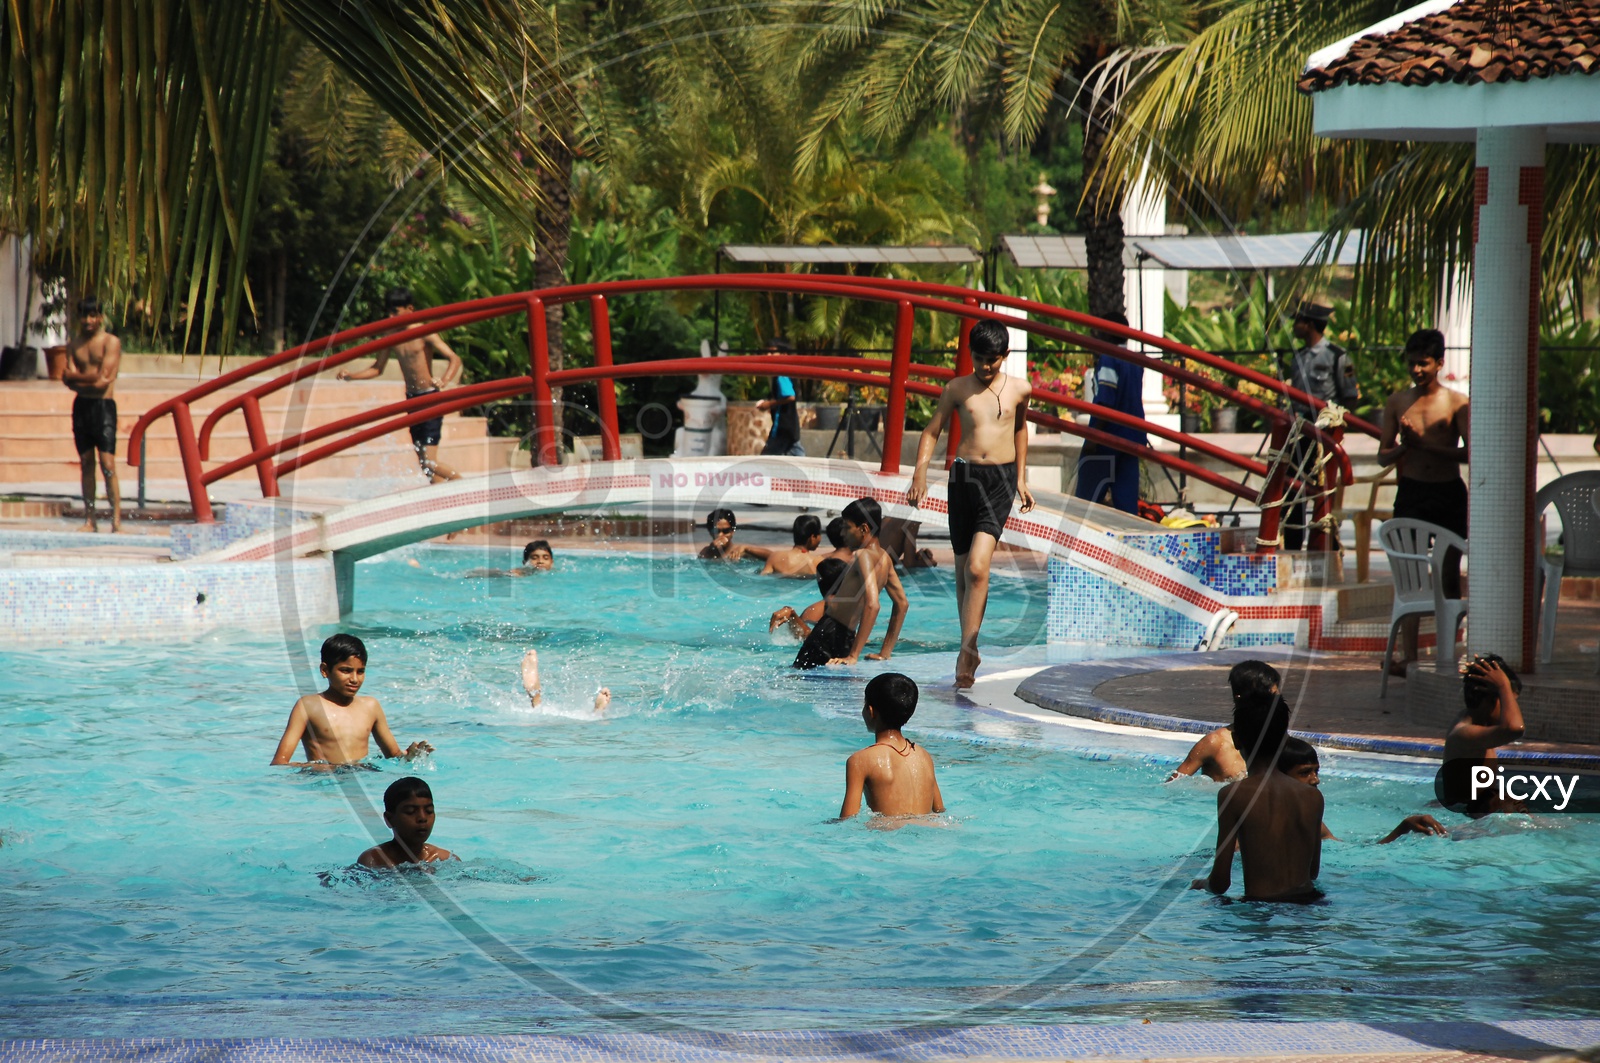 Children and men Playing in the swimming pool at a Water park